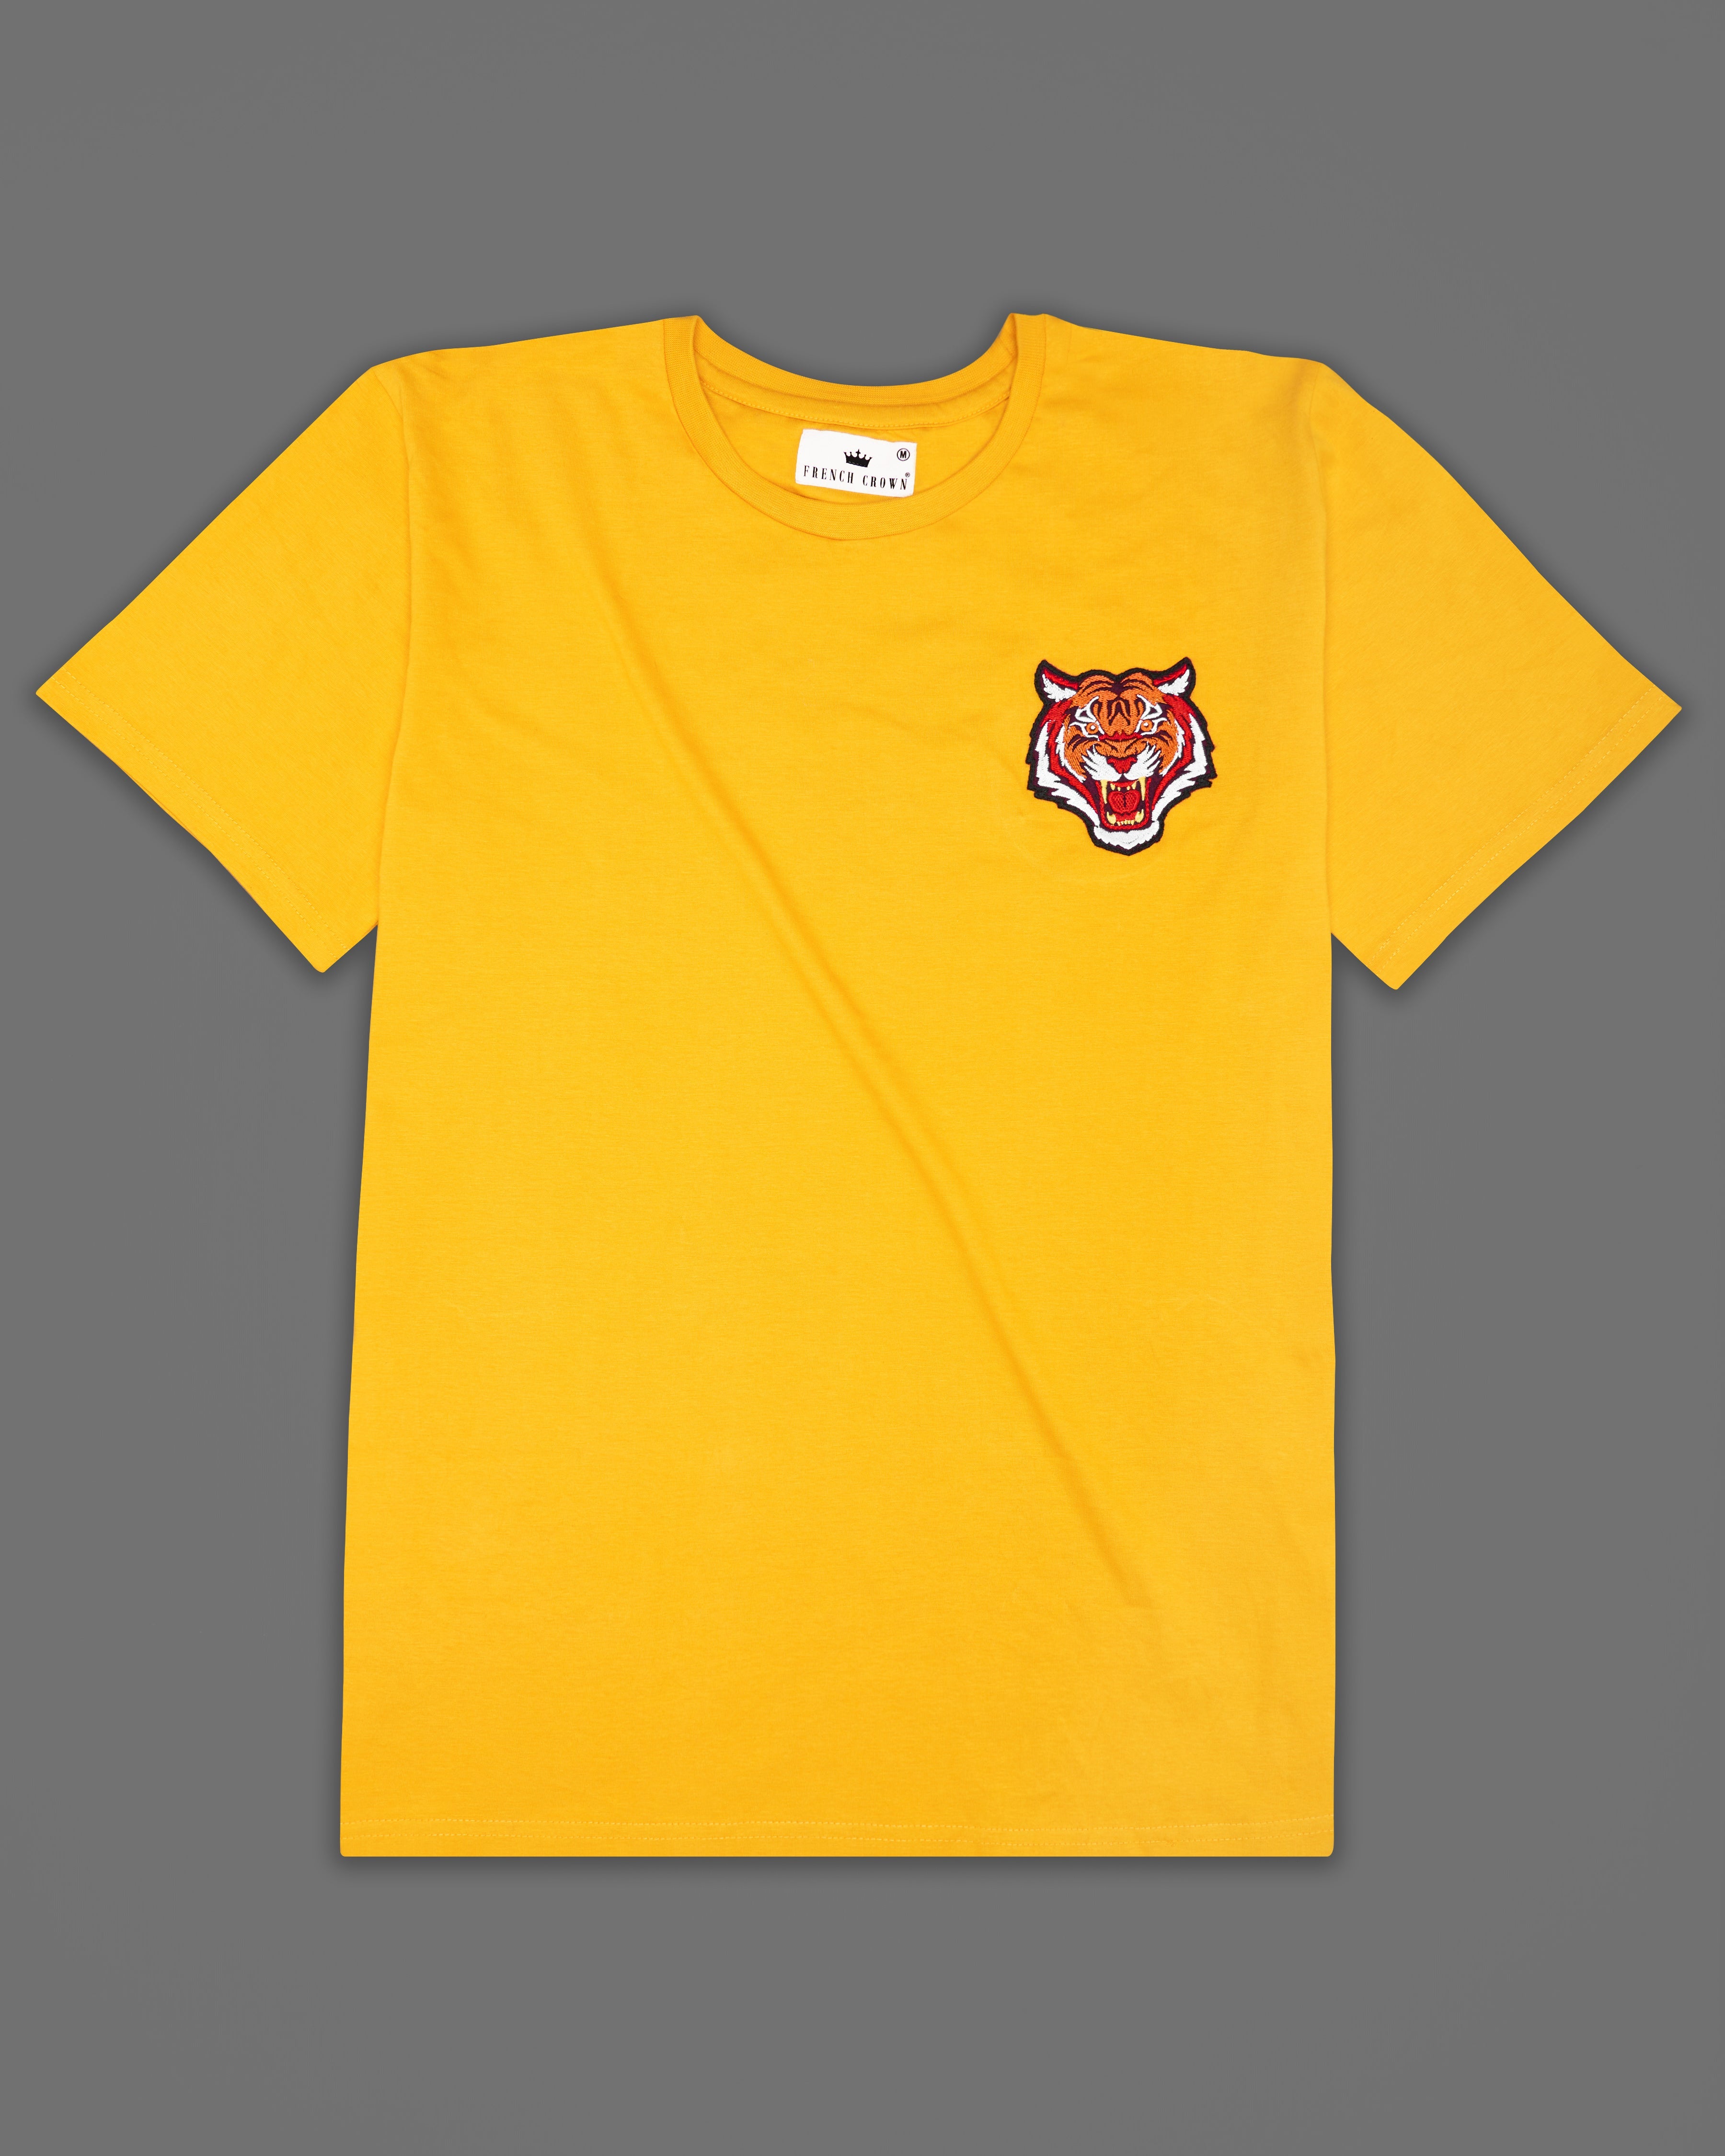 Sandstorm Yellow Tiger Embroidered Organic Cotton T-shirt TS070-W03-S, TS070-W03-M, TS070-W03-L, TS070-W03-XL, TS070-W03-XXL